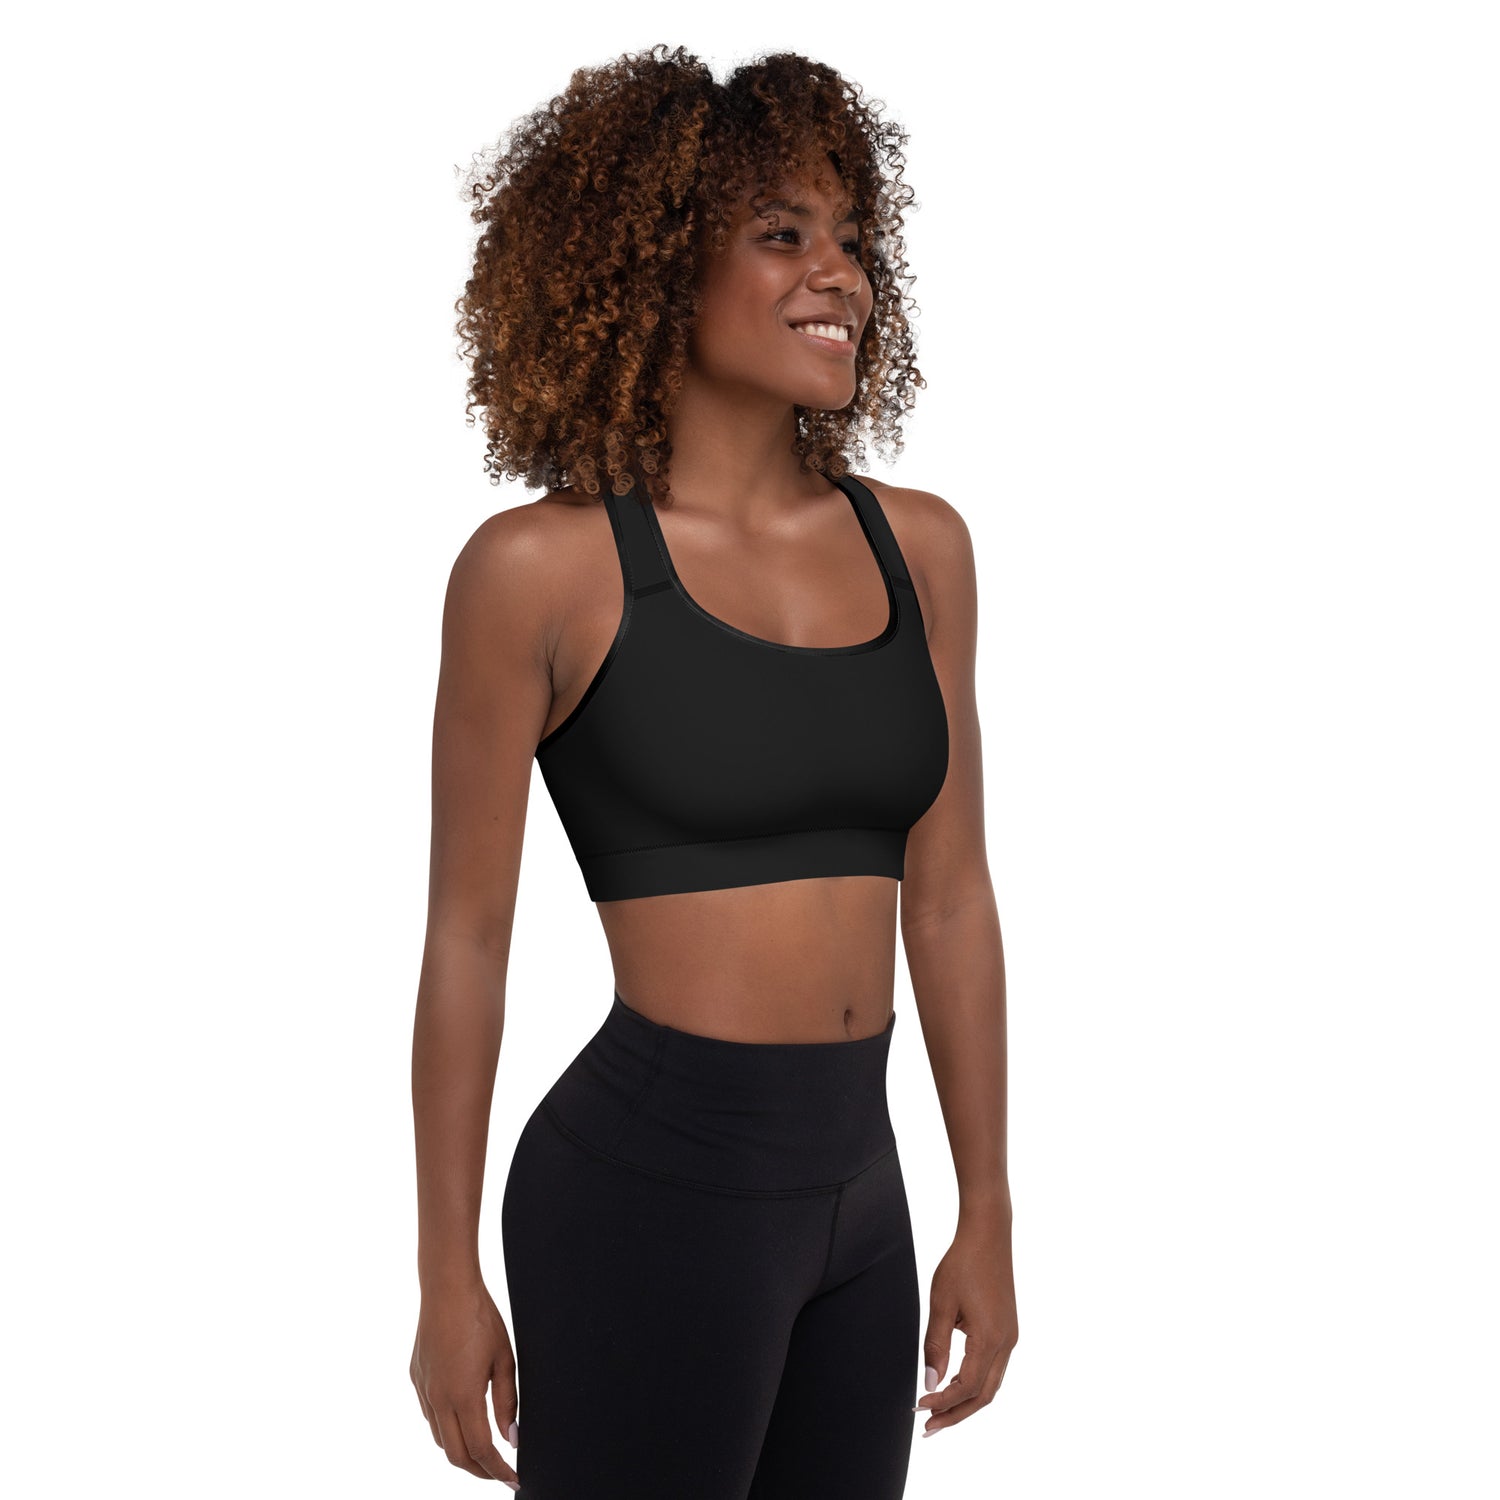 Right view of the Champletes padded sports bra.